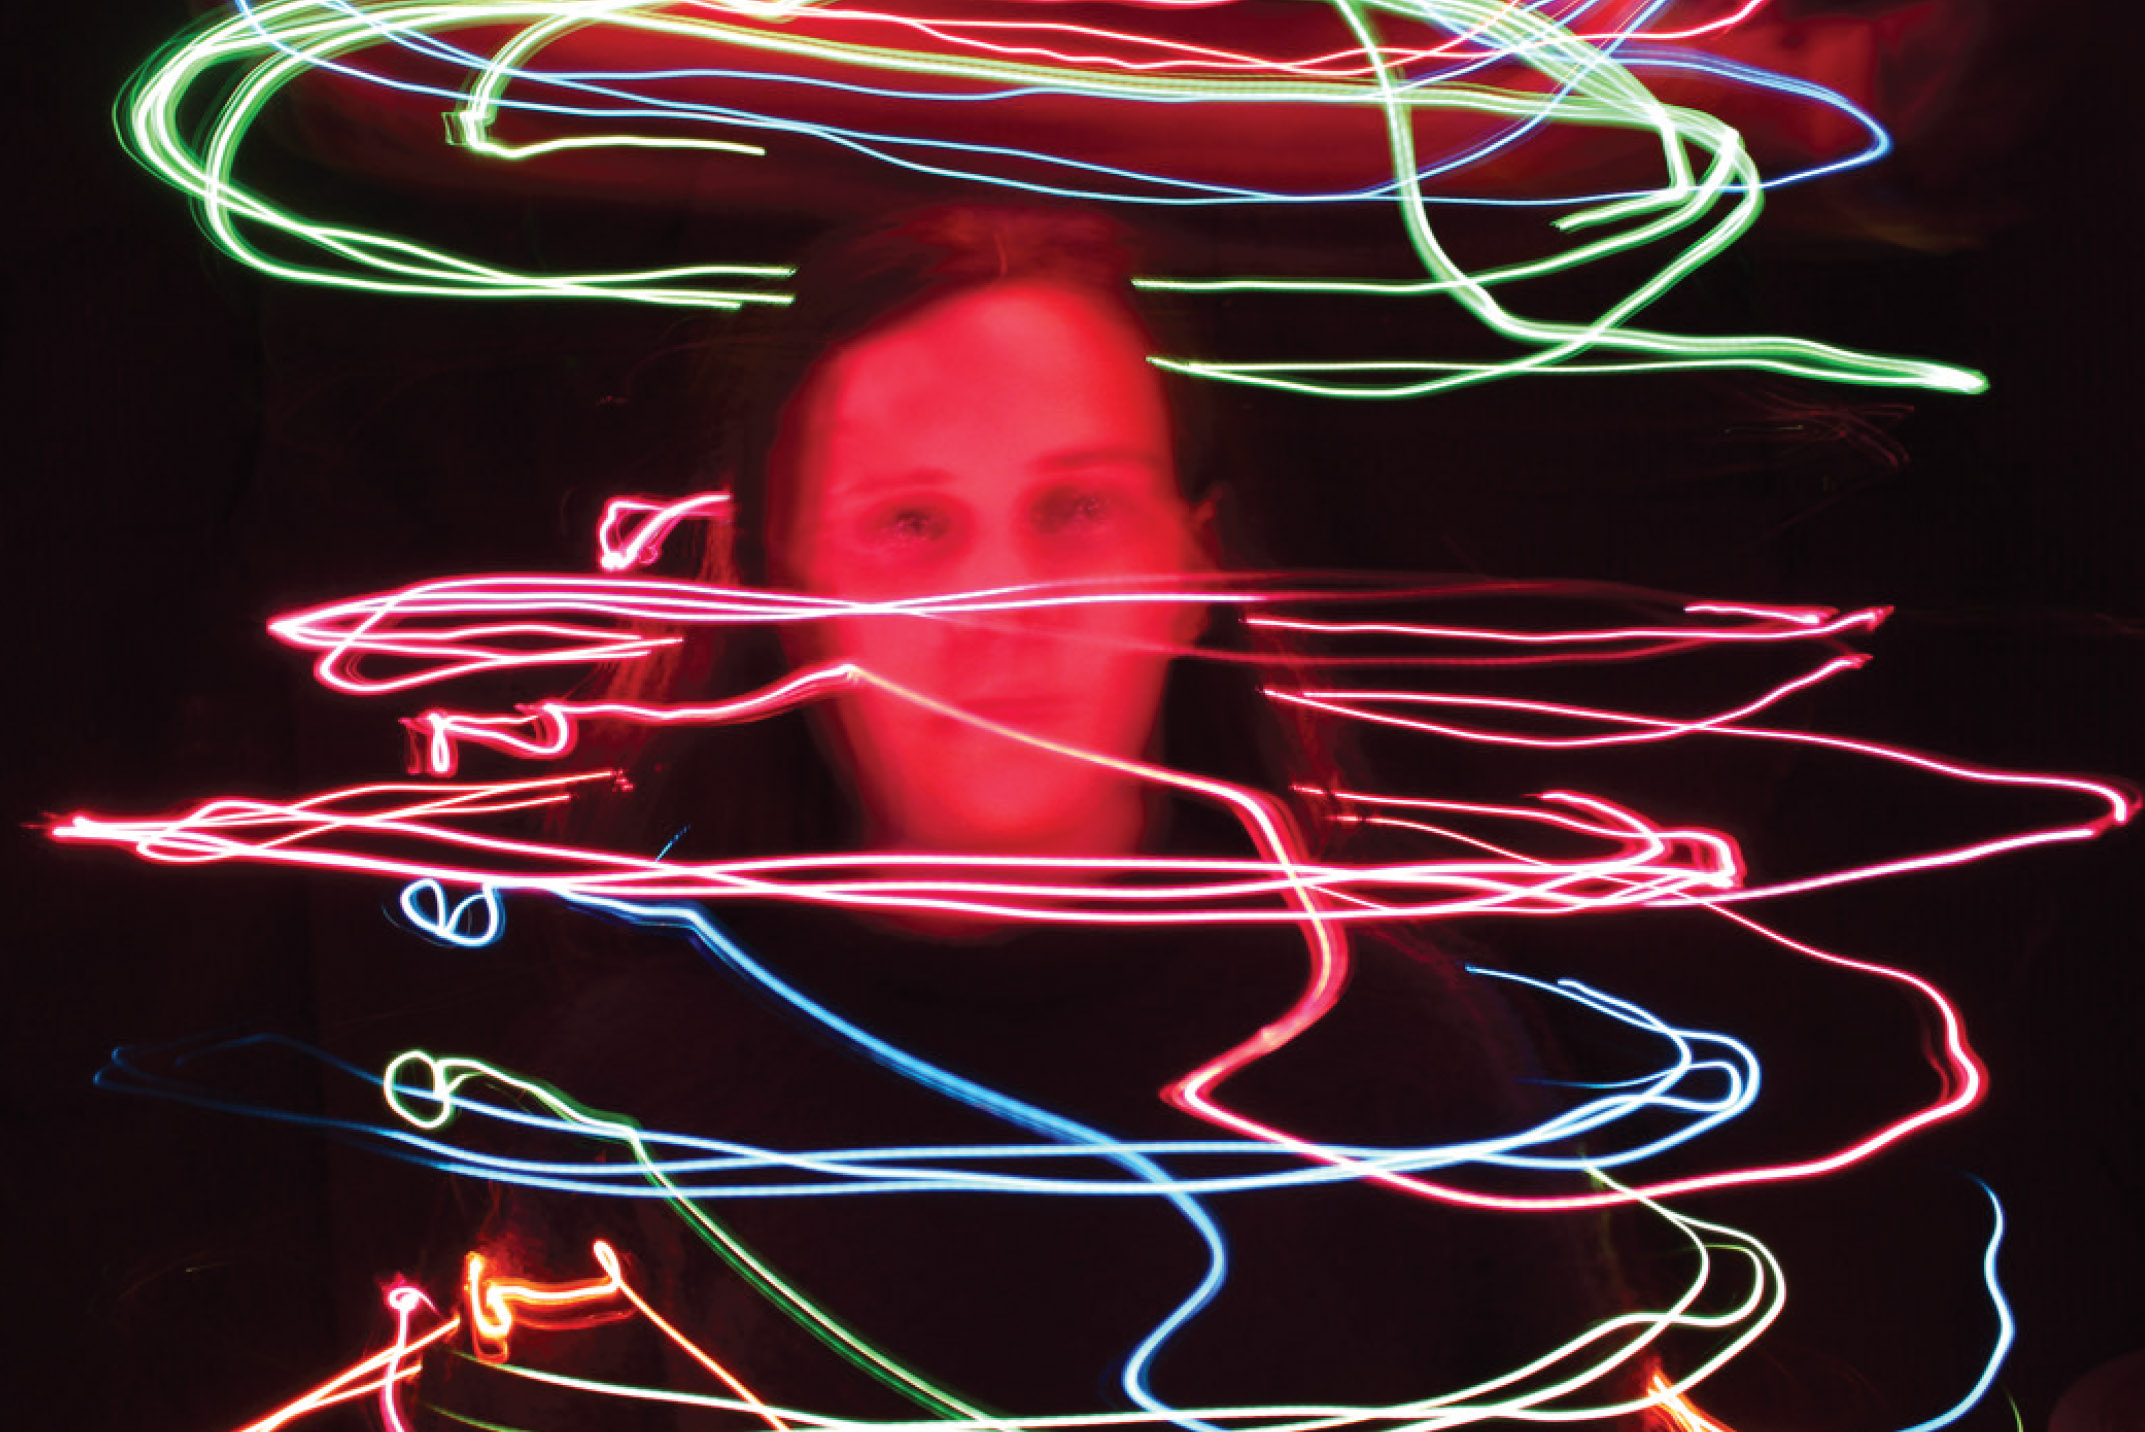 Digital Photograph "Energy" depicting a black background with a person surrounded by multi-colored neon squiggly lights.